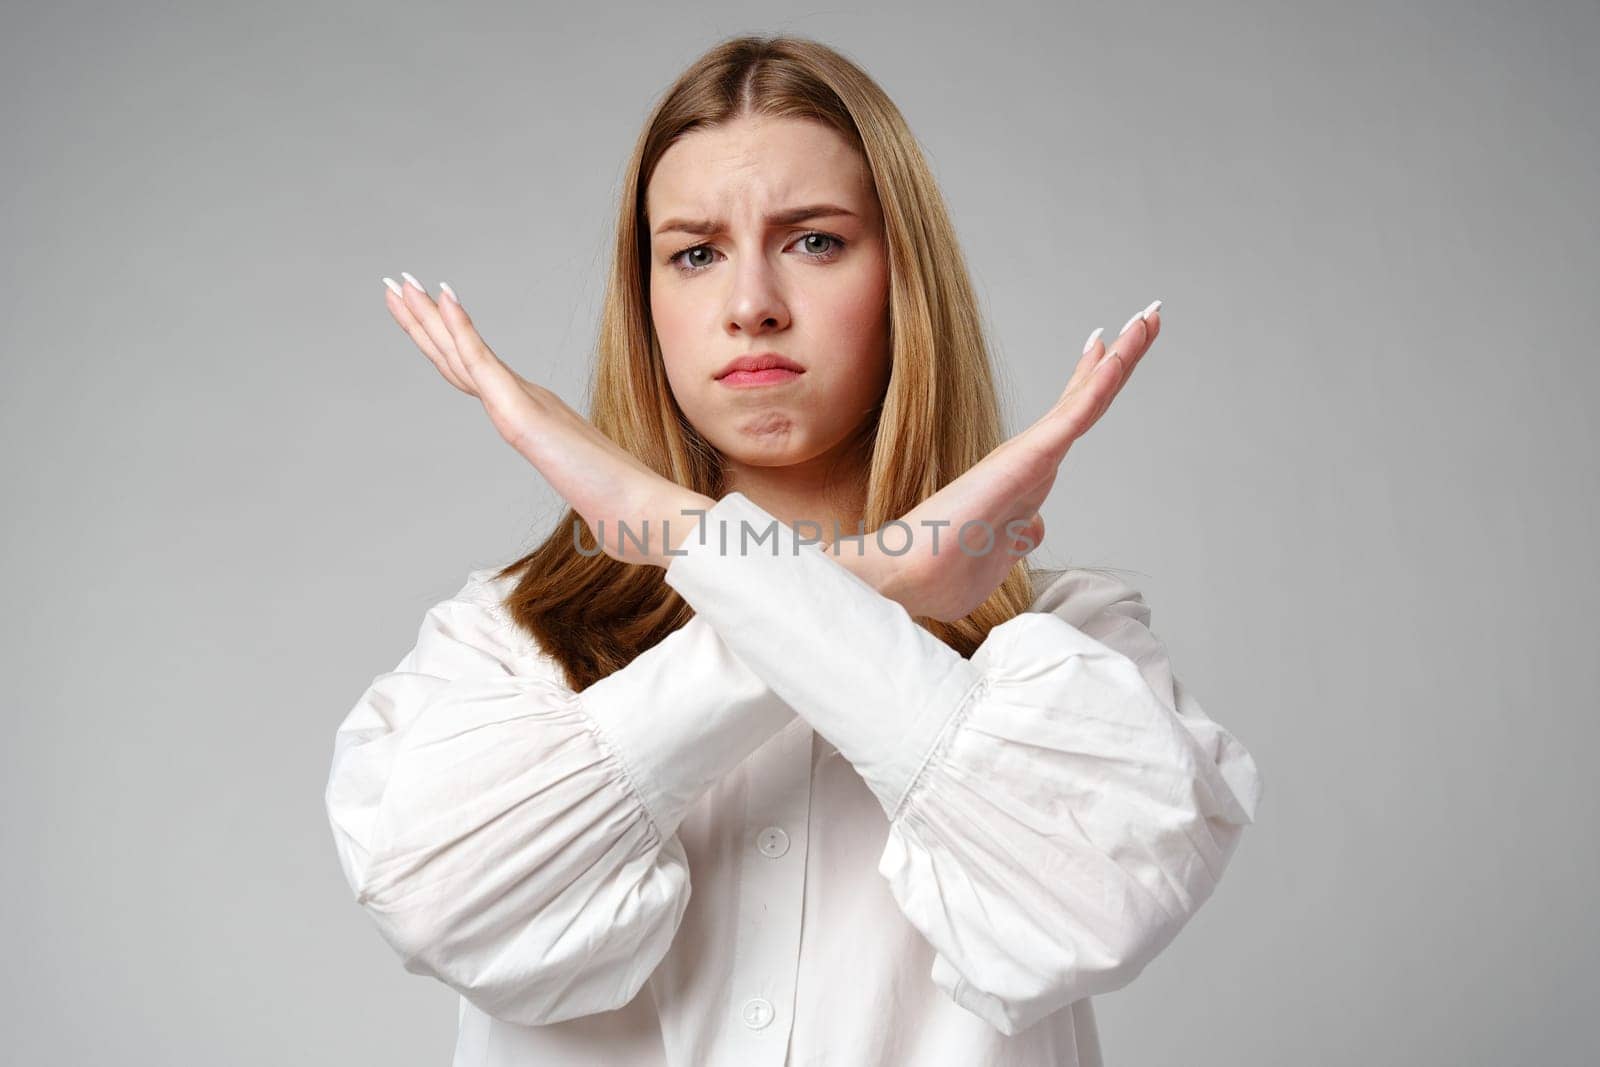 oung Woman Making X Sign With Arms to Express Prohibition or Disagreement in studio